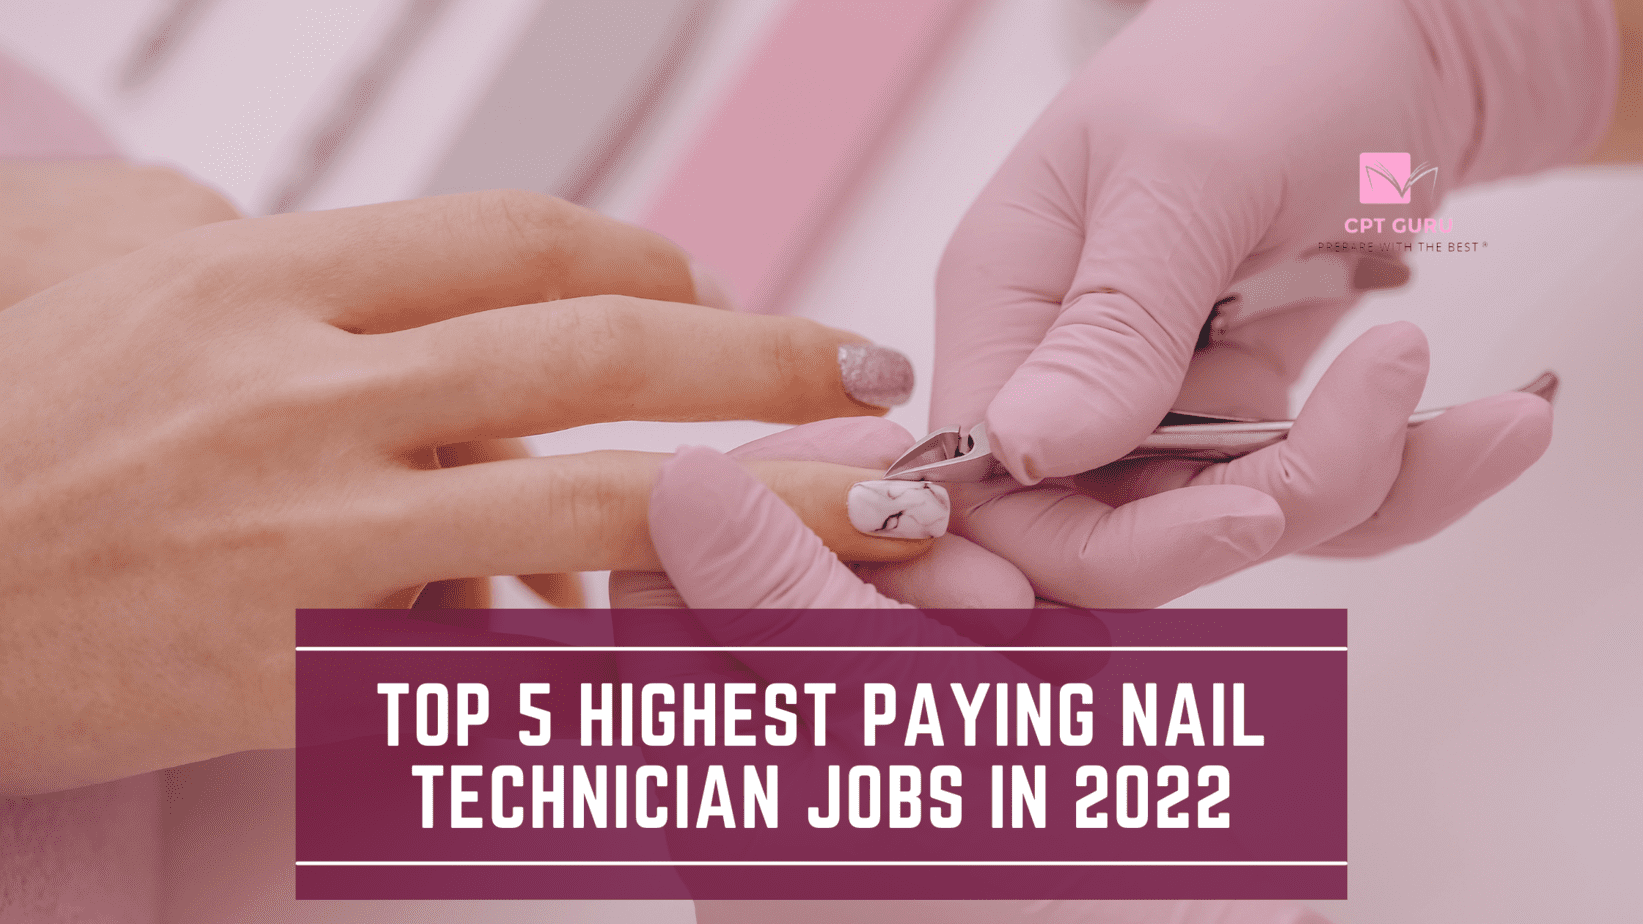 Top 5 Highest-Paying Nail Technician Jobs in 2022